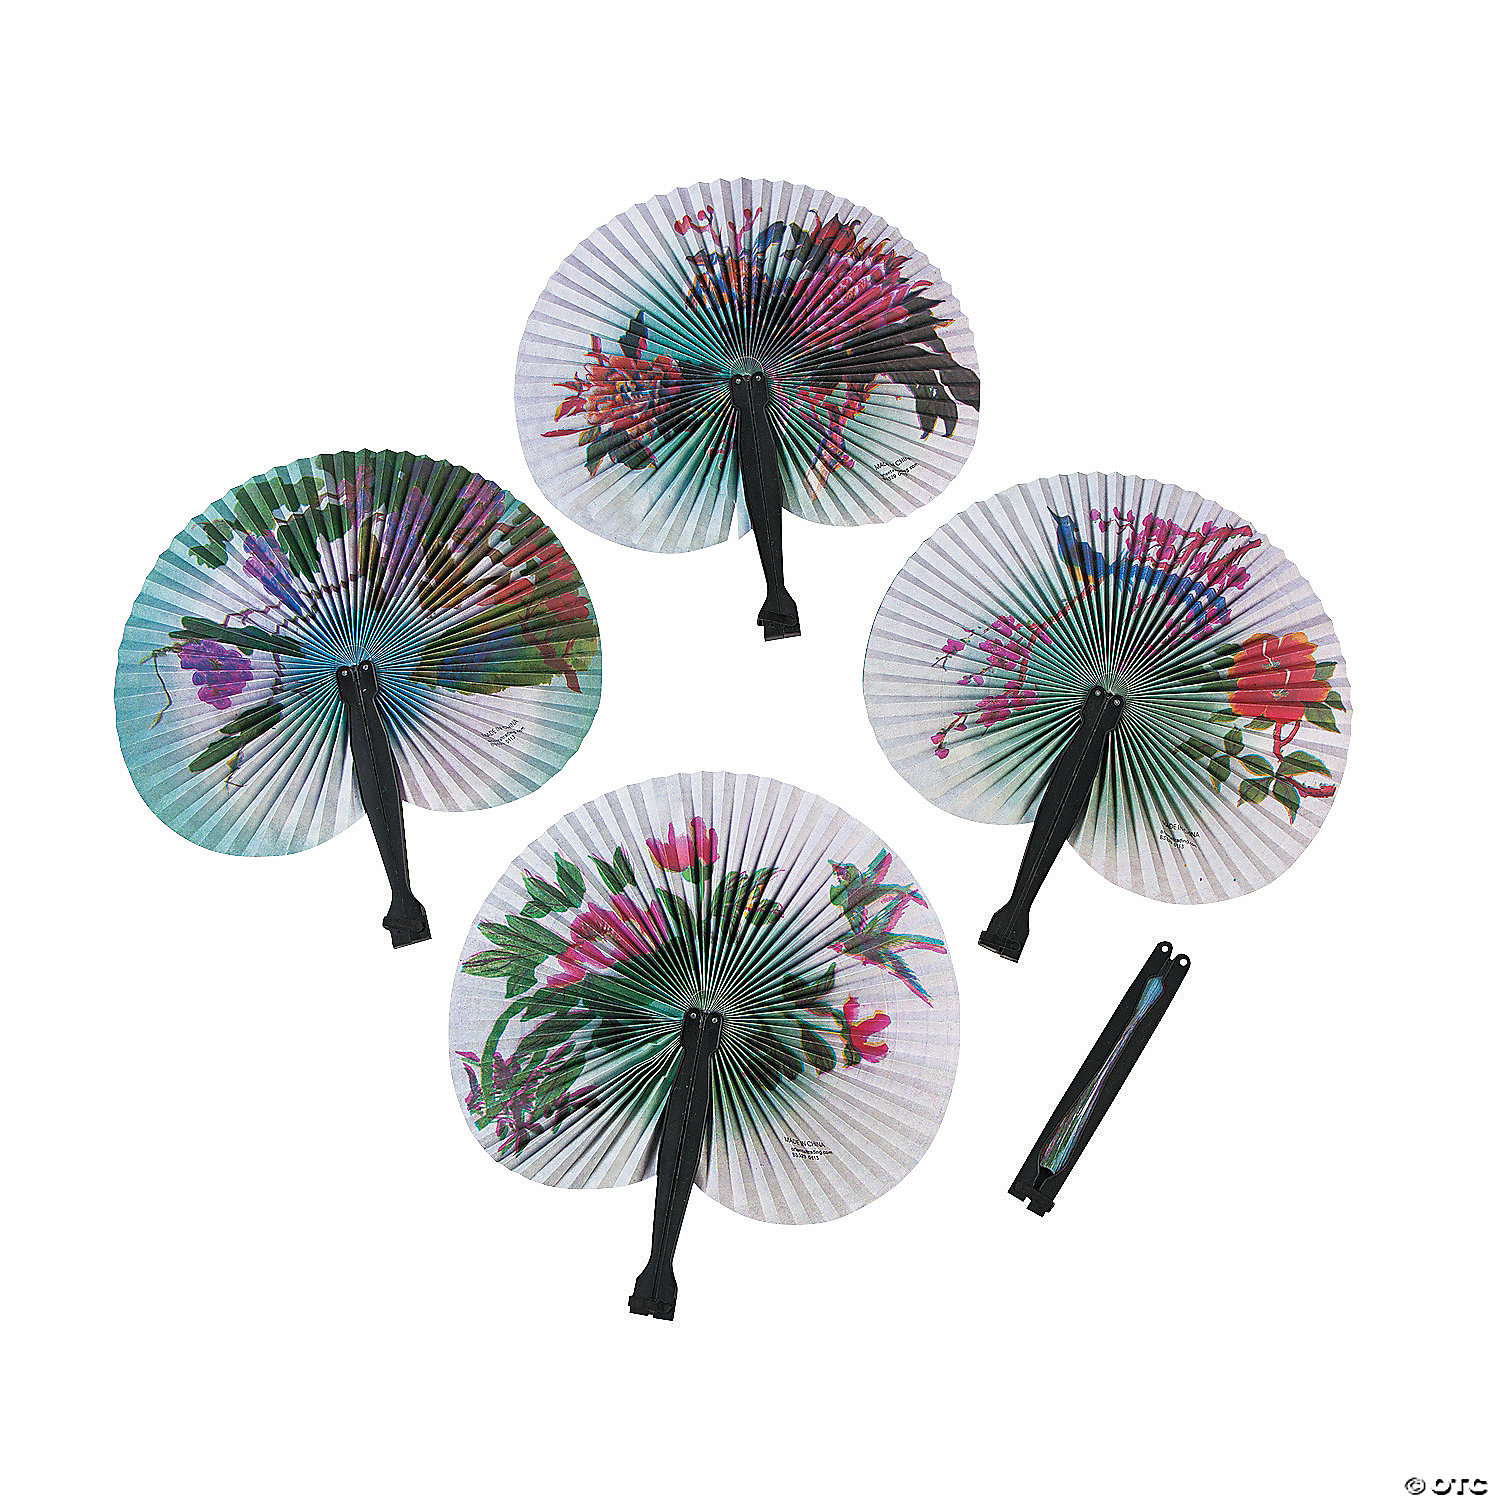 Lot of 6 SOLID COLOR Asian Chinese Japanese HAND FAN Folding Dance Fan New 